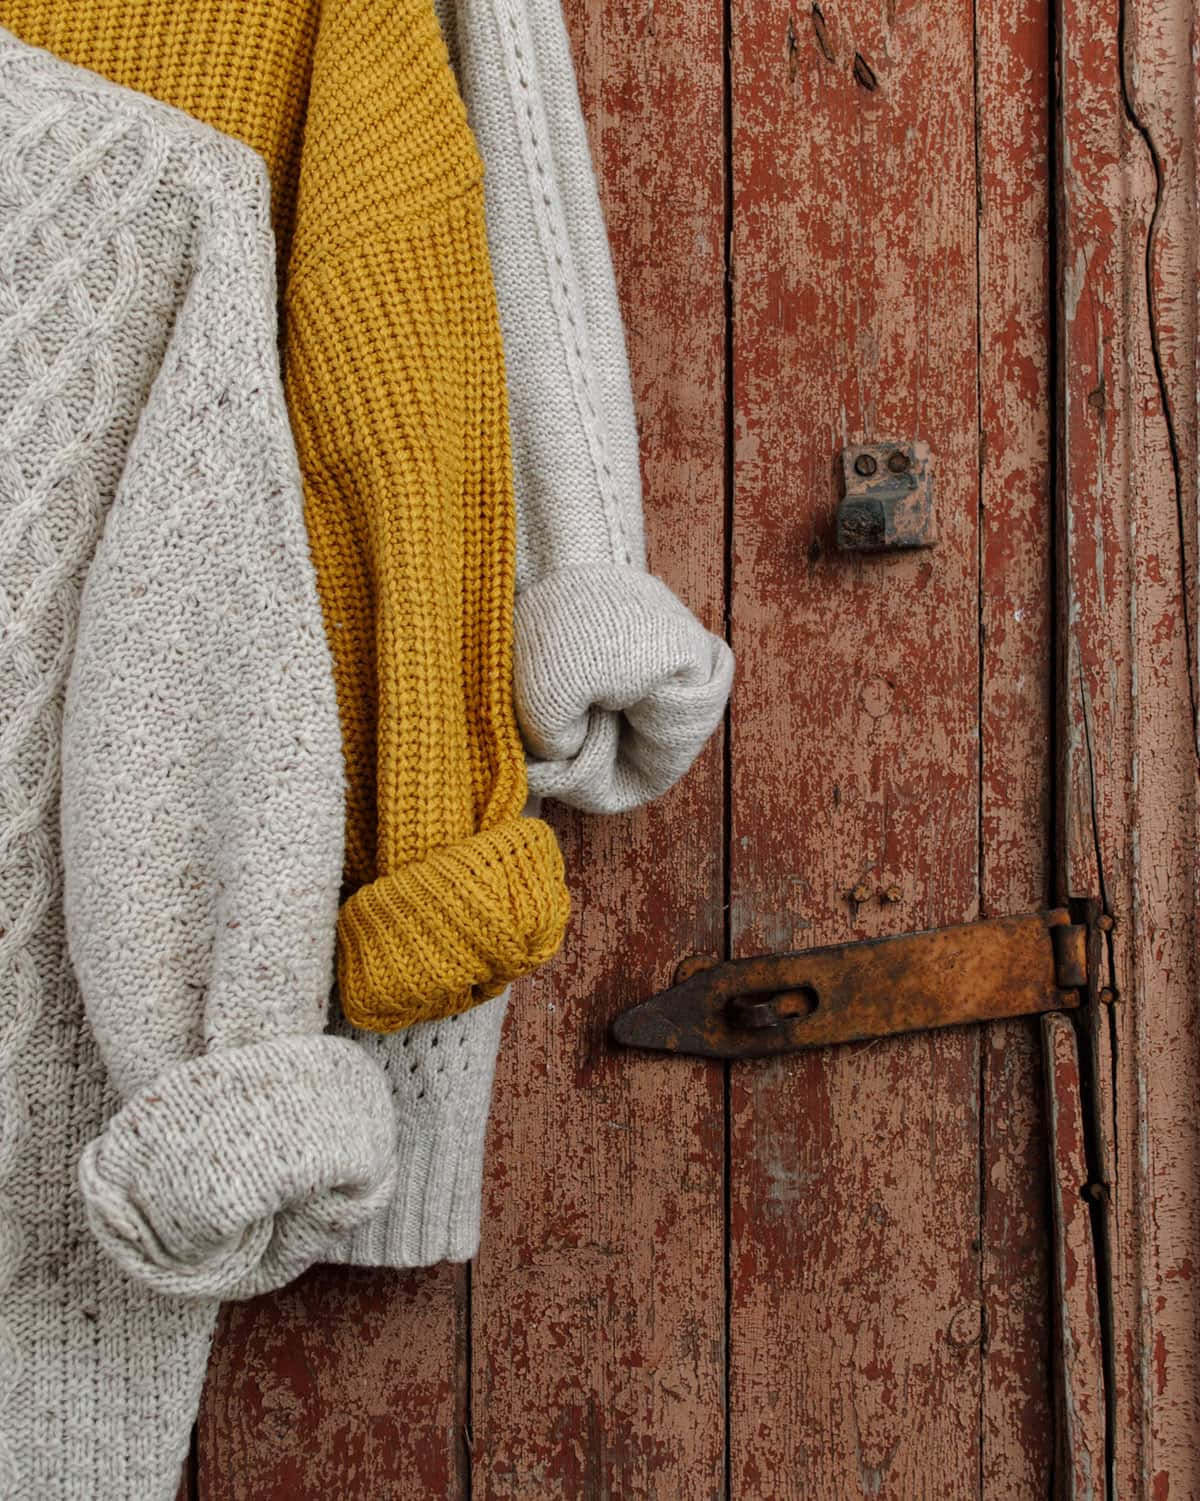 Crocheted Apparel Made Of Knitting Wools Wallpaper